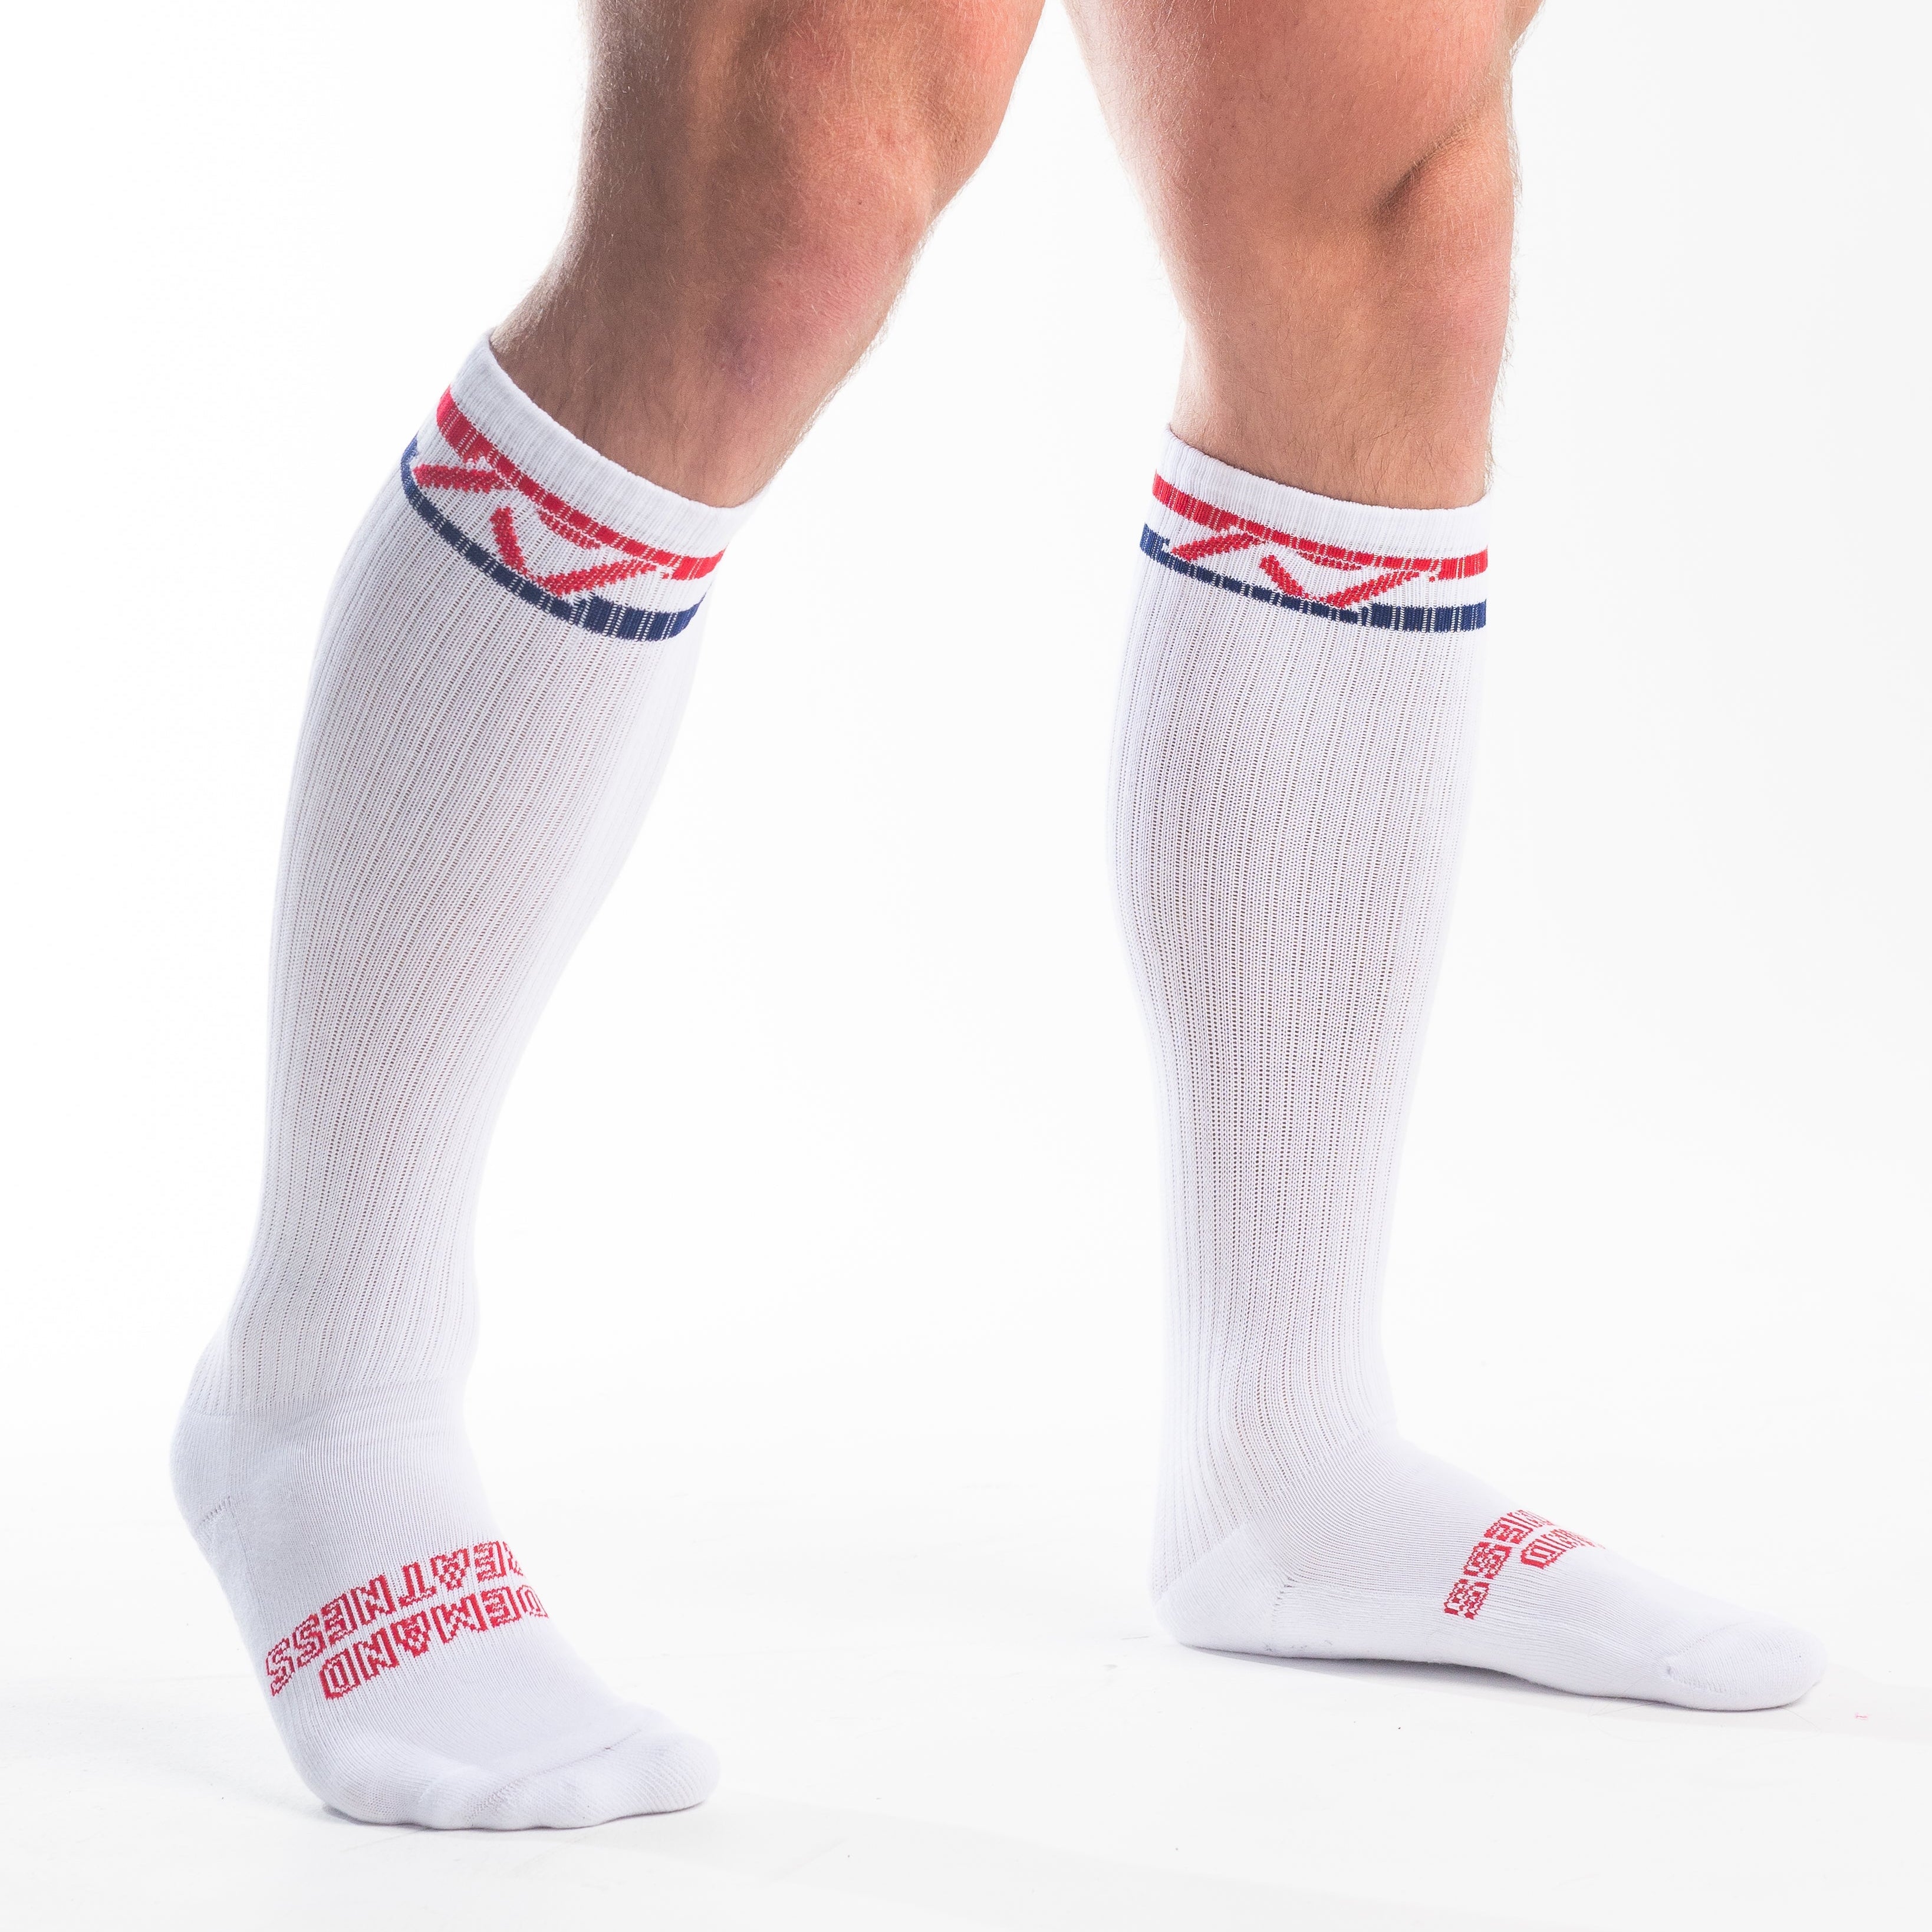 A7 RWB Deadlift socks are designed specifically for pulls and keep your shins protected from scrapes. A7 deadlift socks are a perfect pair to wear in training or powerlifting competition. The IPF Approved Kit includes Powerlifting Singlet, A7 Meet Shirt, A7 Zebra Wrist Wraps, A7 Deadlift Socks, Hourglass Knee Sleeves (Stiff Knee Sleeves and Rigor Mortis Knee Sleeves). Genouillères powerlifting shipping to France, Spain, Ireland, Germany, Italy, Sweden and EU.